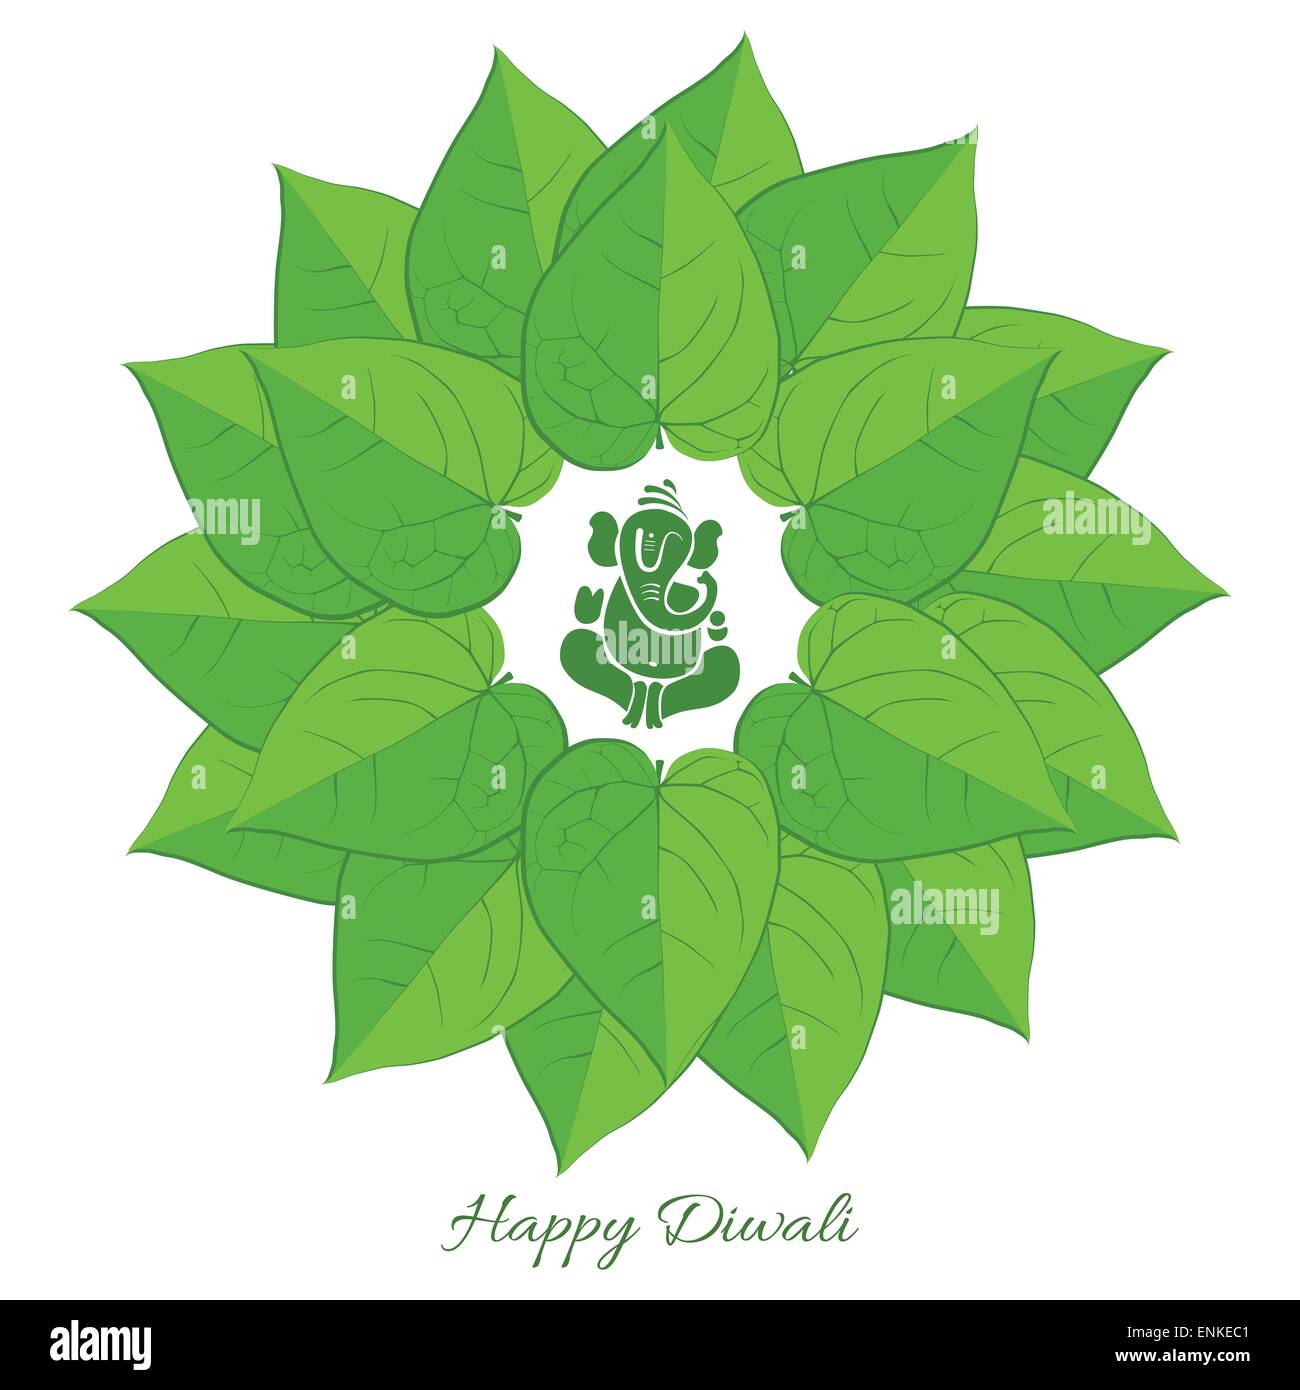 Happy Green Diwali Vector Design In Grungy Background Royalty Free SVG,  Cliparts, Vectors, and Stock Illustration. Image 191790742.